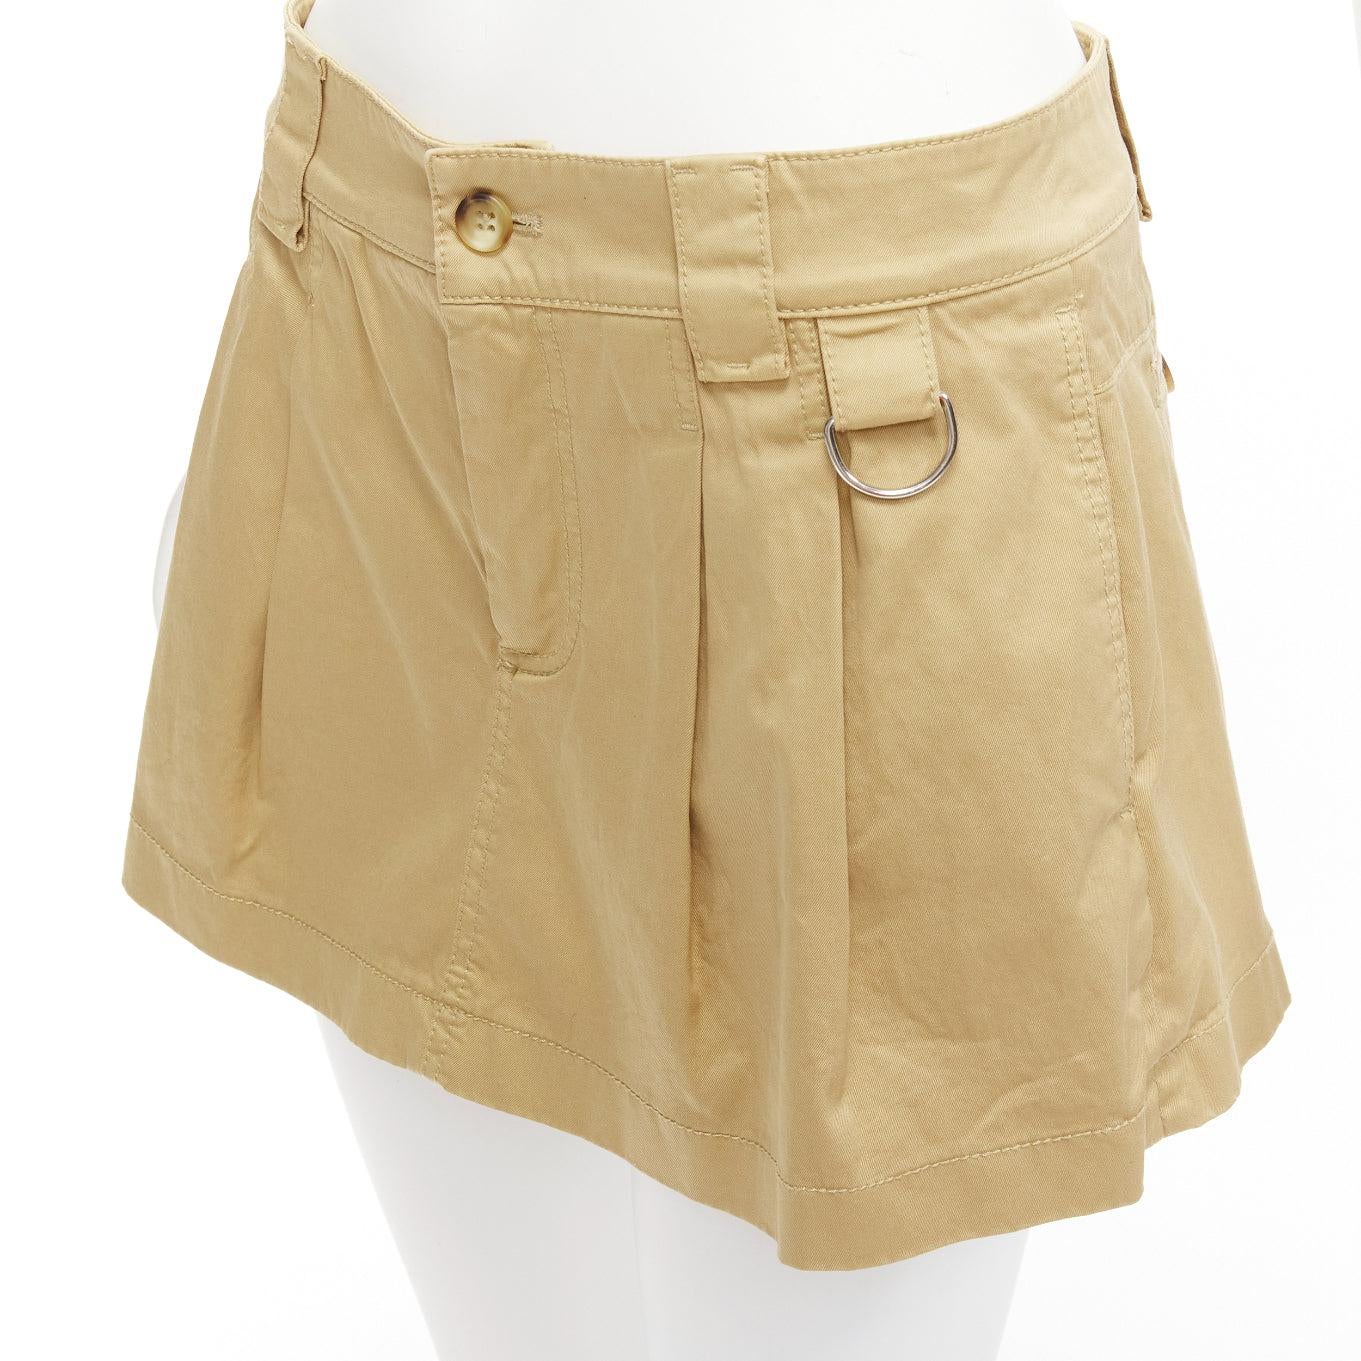 RED VALENTINO beige cotton silver D ring pleated safari skorts IT38 XS
Reference: AAWC/A00871
Brand: Red Valentino
Material: Cotton, Blend
Color: Beige
Pattern: Solid
Closure: Zip Fly
Lining: Beige Fabric
Made in: Romania

CONDITION:
Condition: